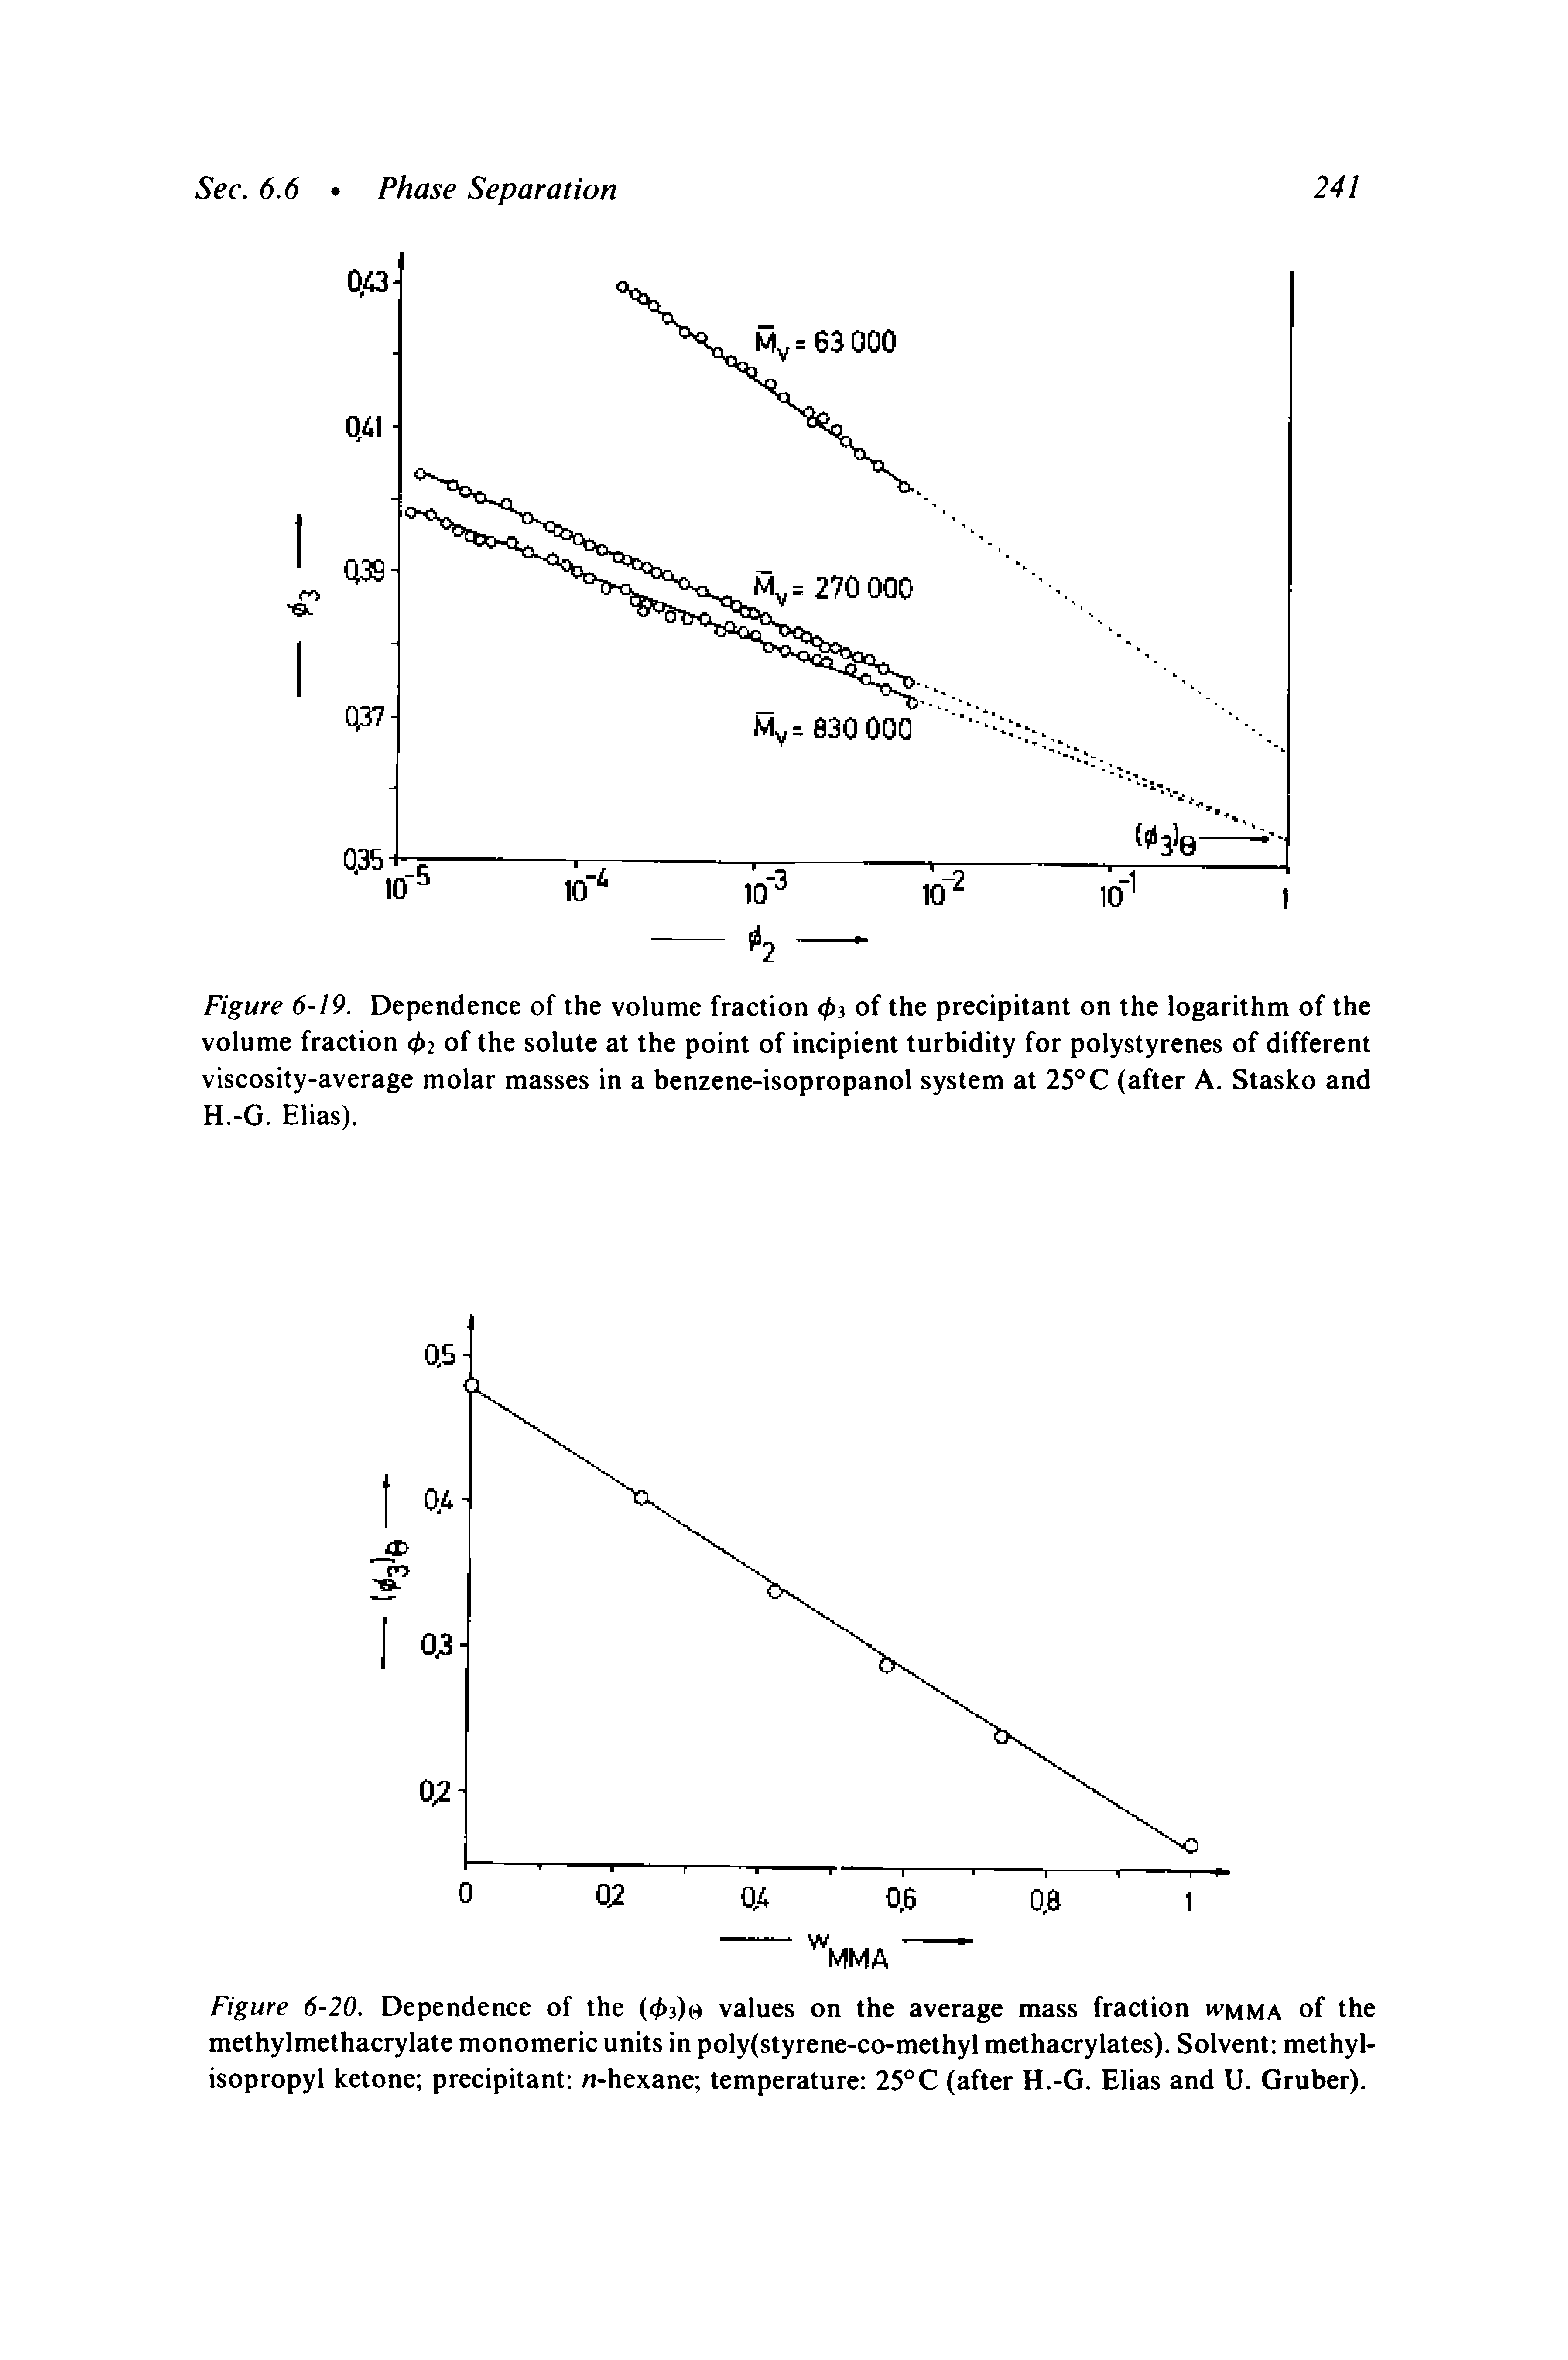 Figure 6-19. Dependence of the volume fraction 03 of the precipitant on the logarithm of the volume fraction 02 of the solute at the point of incipient turbidity for polystyrenes of different viscosity-average molar masses in a benzene-isopropanol system at 25 C (after A. Stasko and H.-G. Elias).